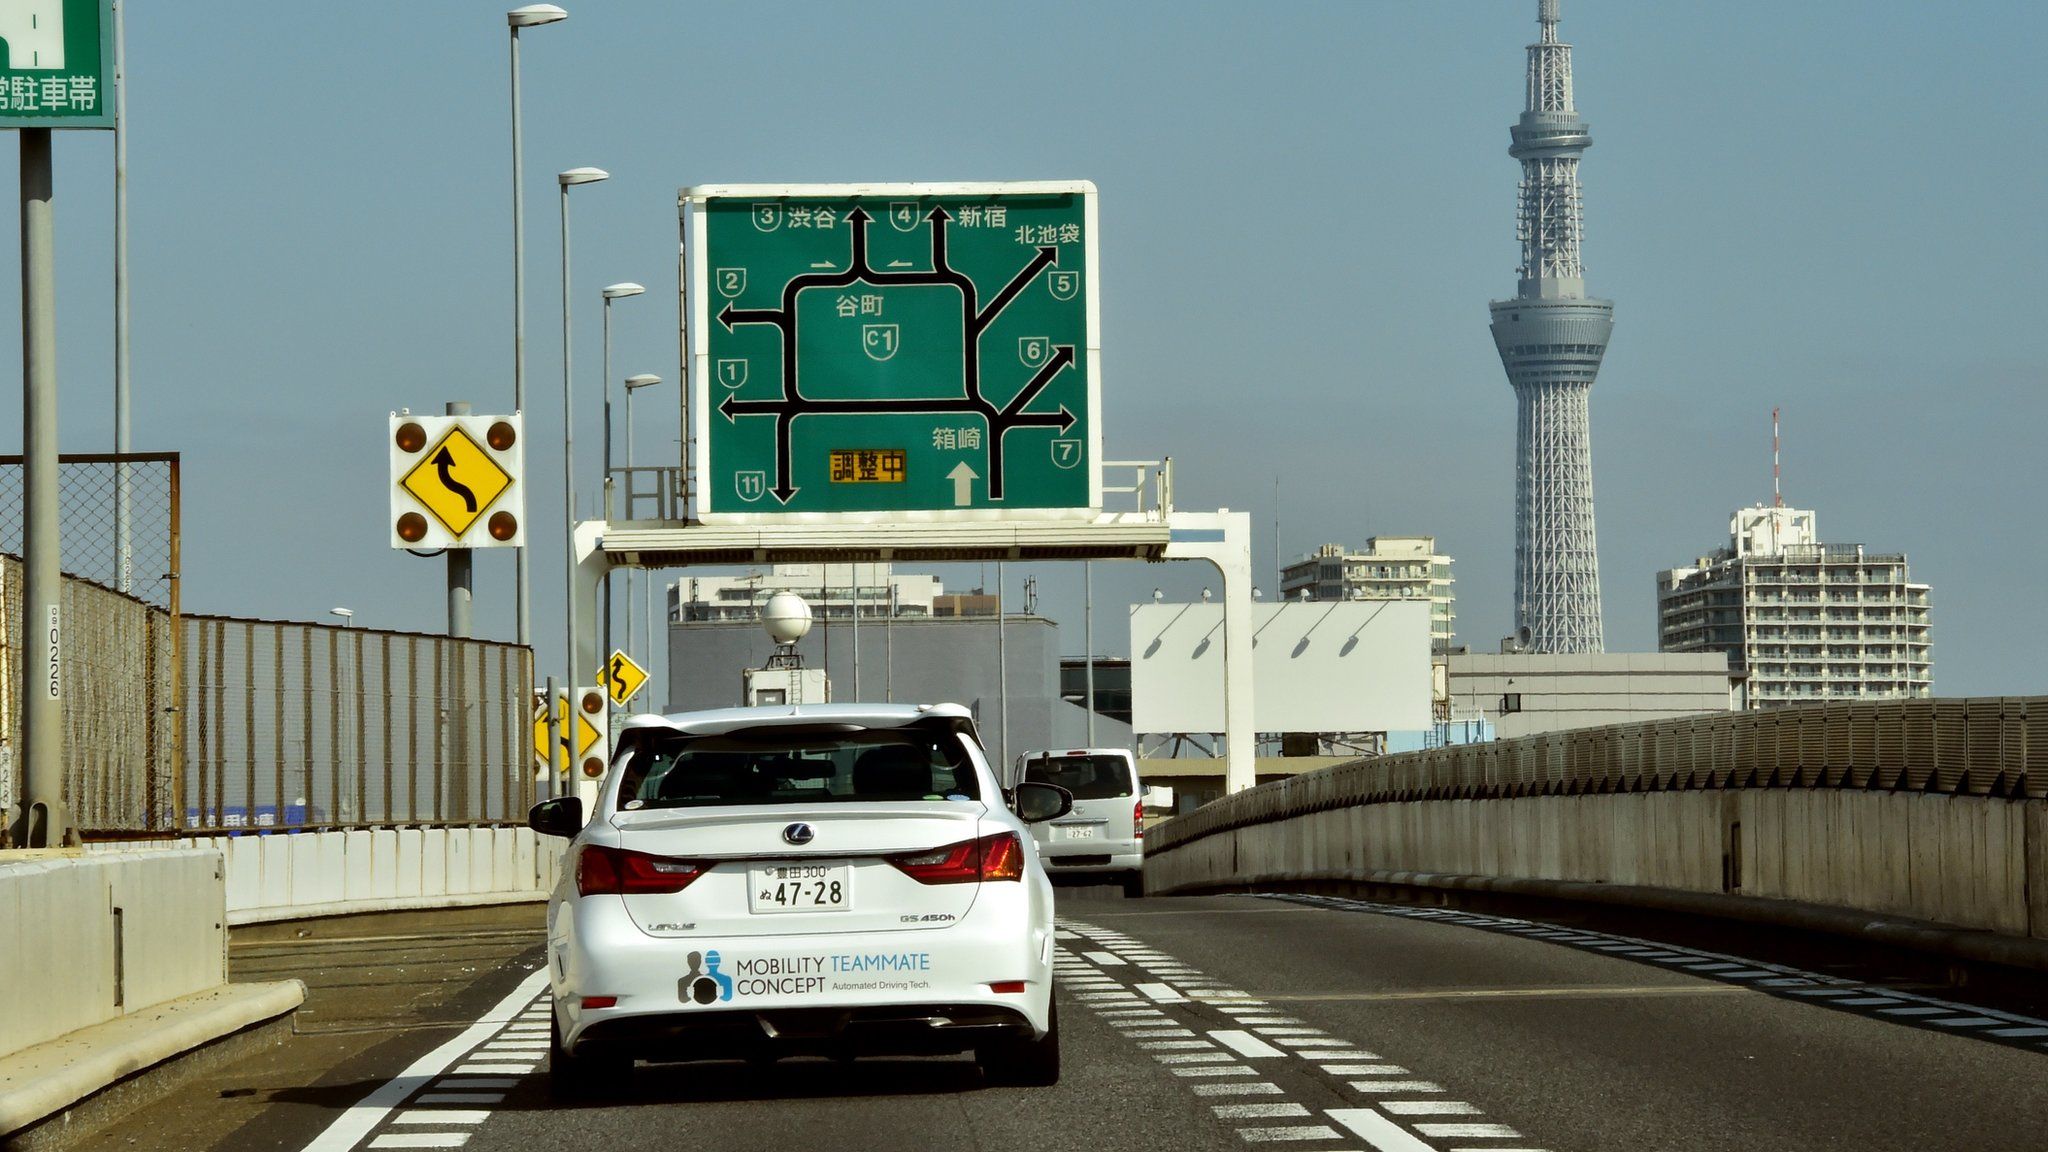 Japan's auto giant Toyota demonstrates autonomous driving with a Lexus GS450h on the Tokyo metropolitan highway during Toyota's advanced technology presentation in Tokyo on October 6, 2015